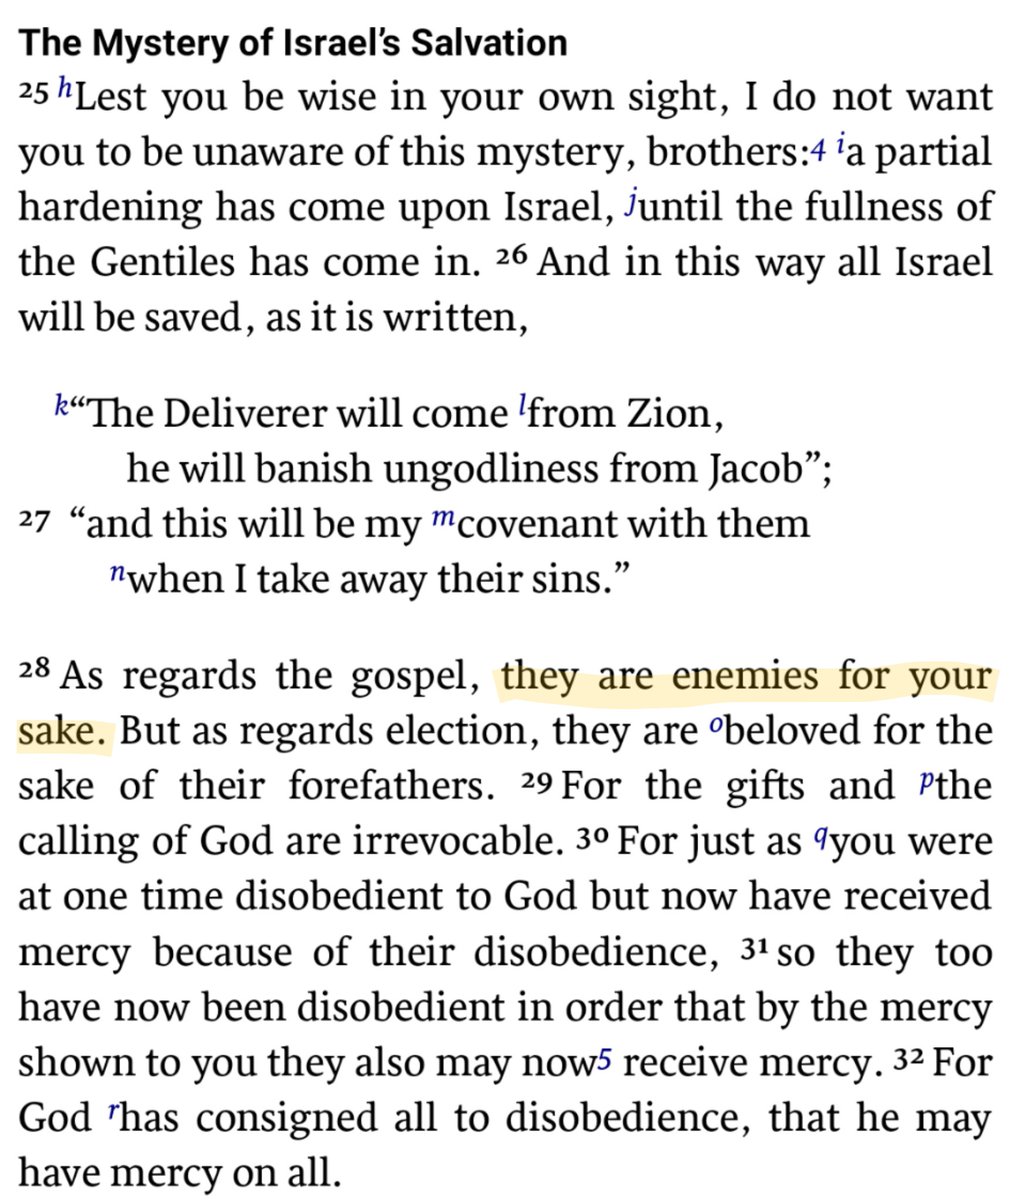 (5/7) Later on, Fr O'Collins criticises two interpolations (i.e. where words are added in translations to better convey meaning) in Romans 5:9 and 11:28.But the addition "of God" in 11:28 is no longer in the ESV (see pic), having been removed in the 2011 revisions!